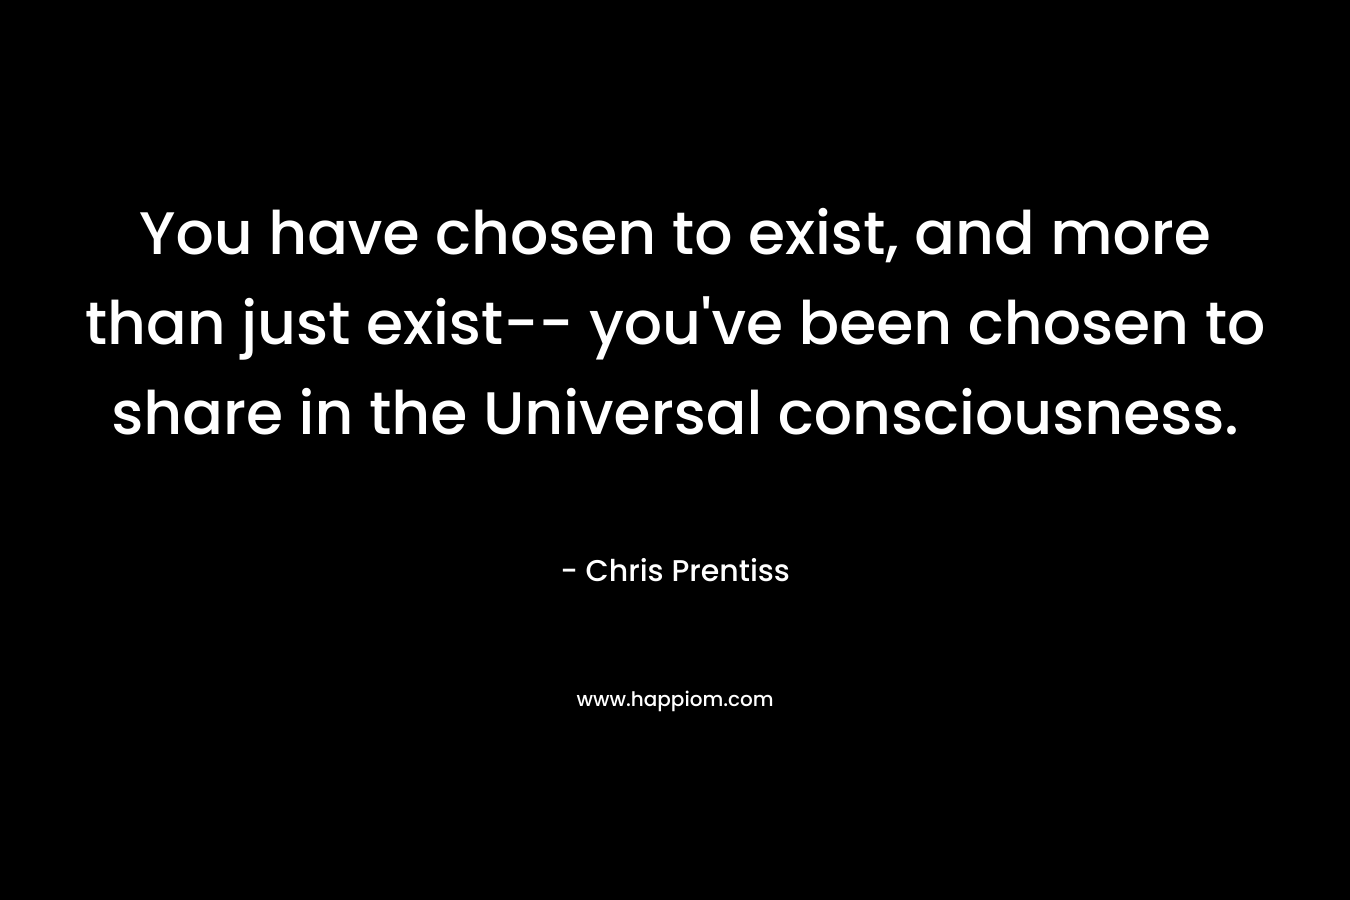 You have chosen to exist, and more than just exist-- you've been chosen to share in the Universal consciousness.